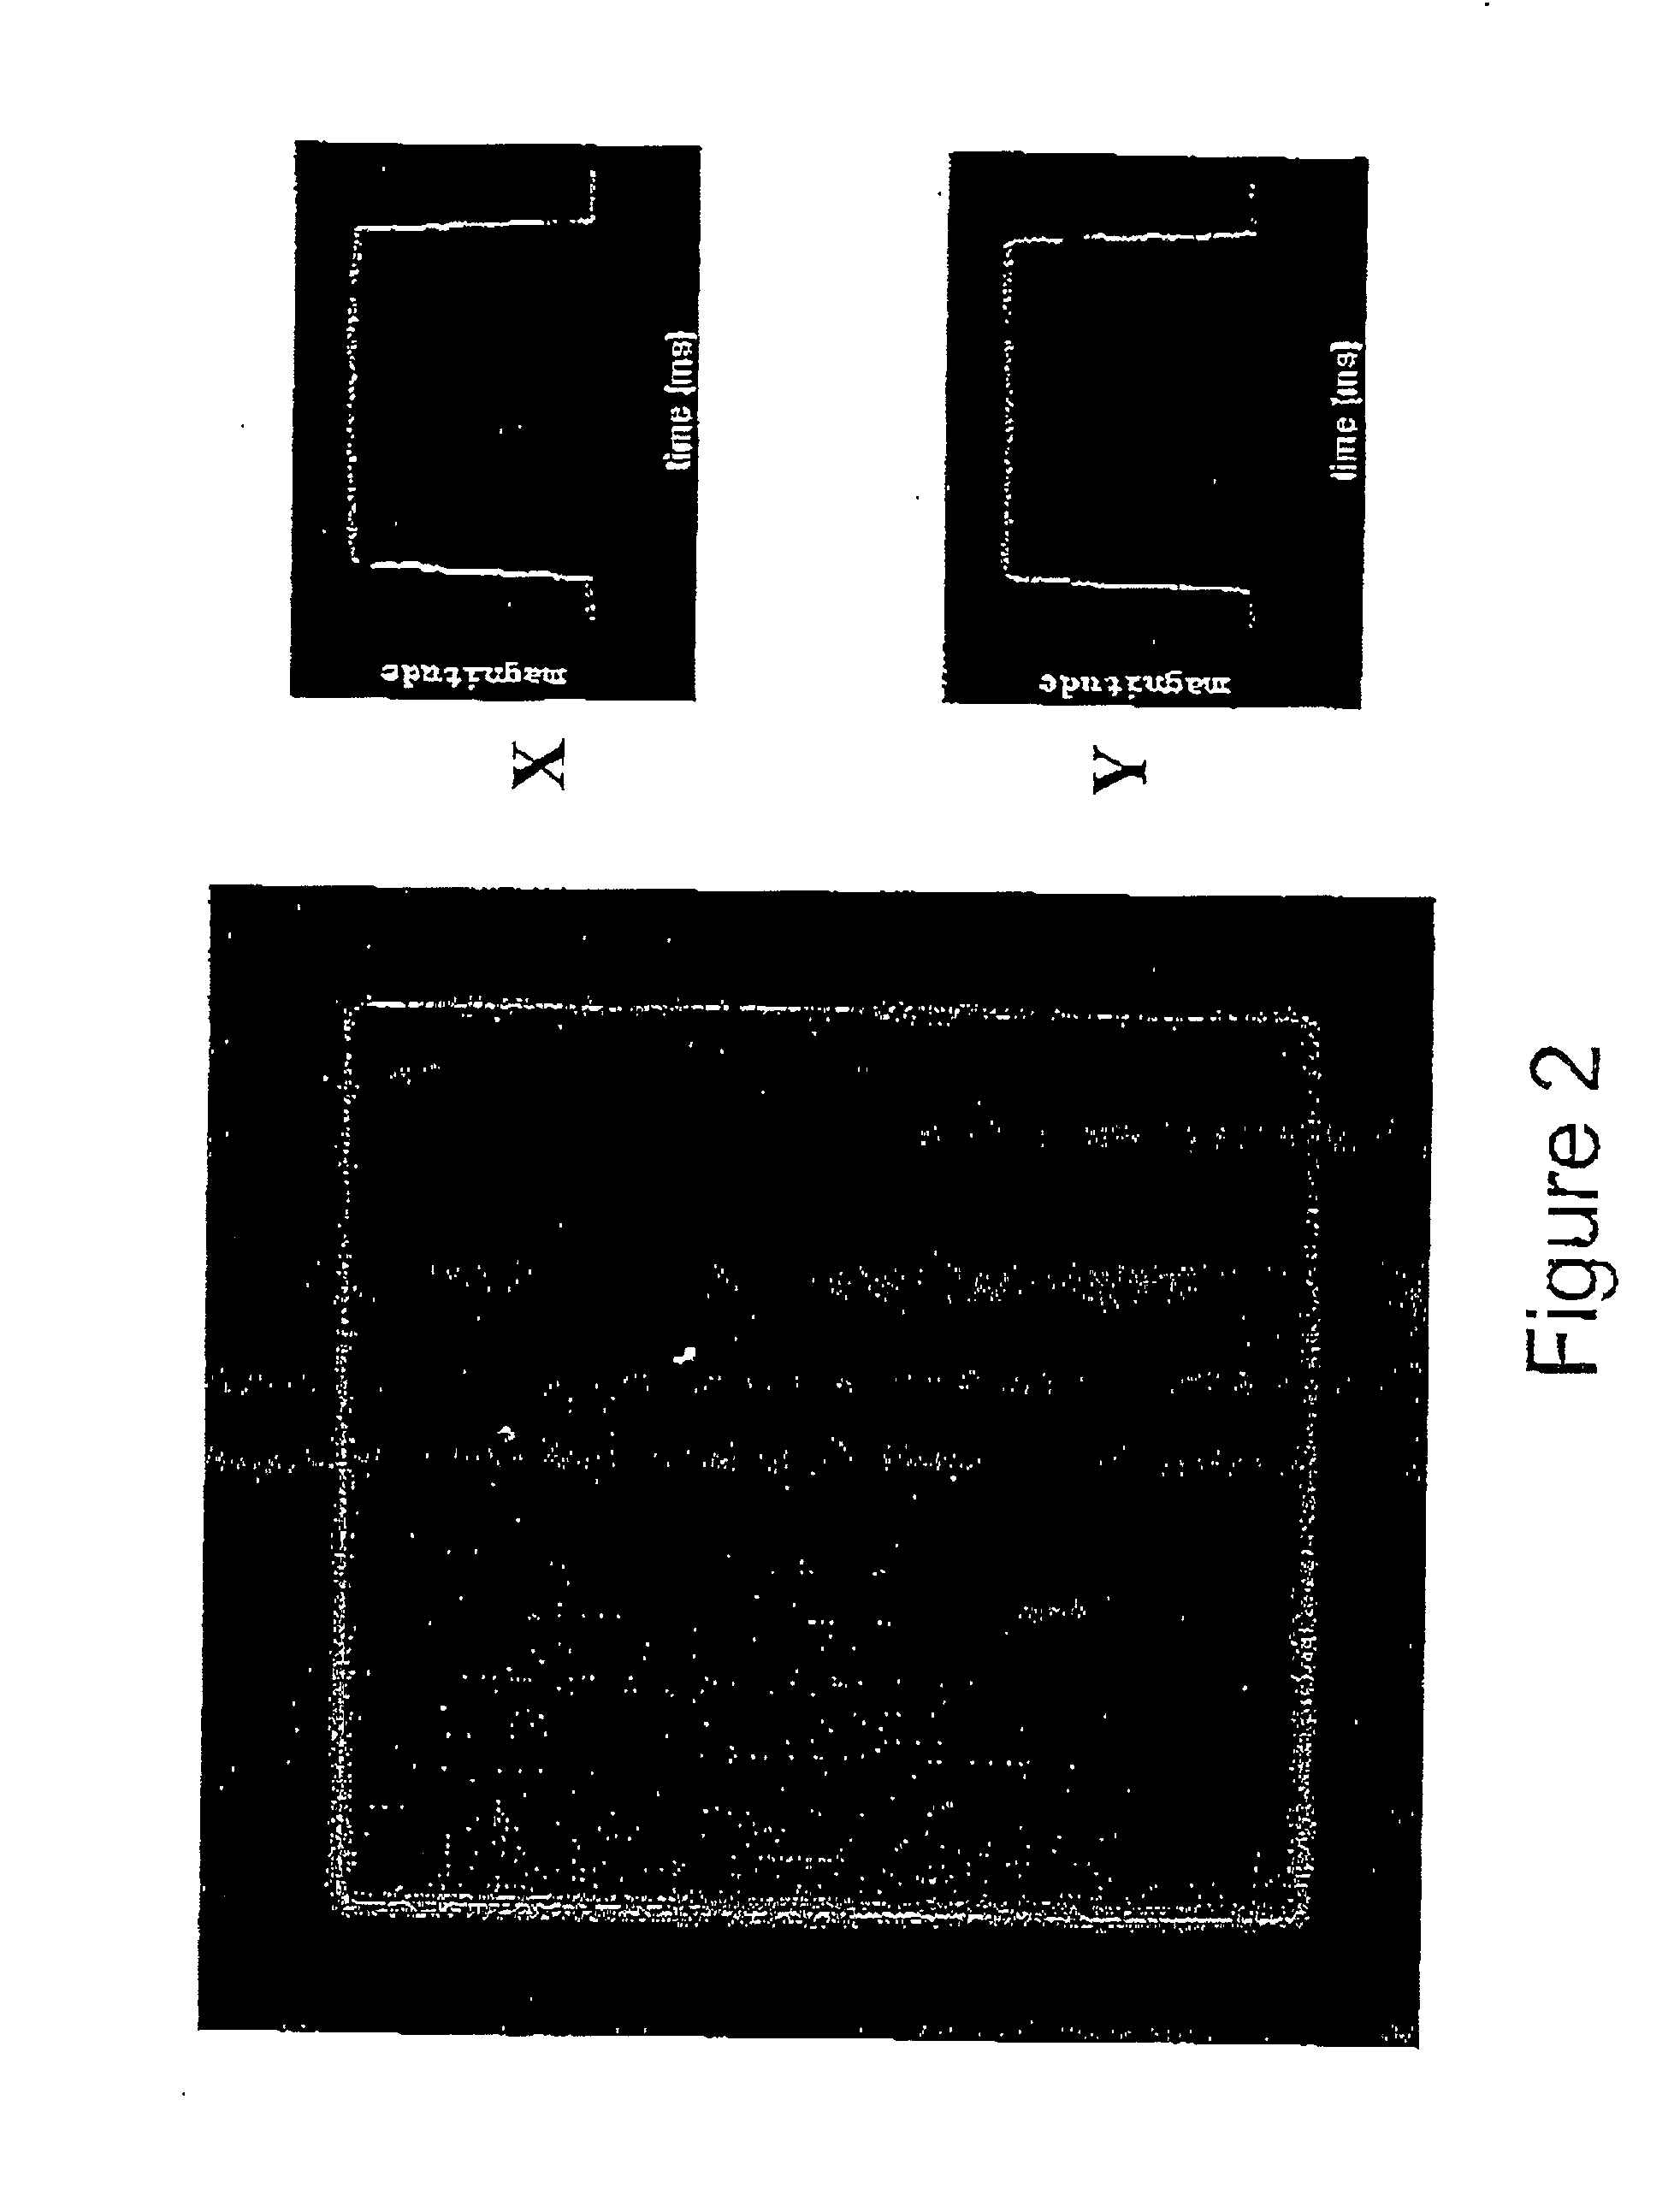 Method for aligning electron beam projection lithography tool